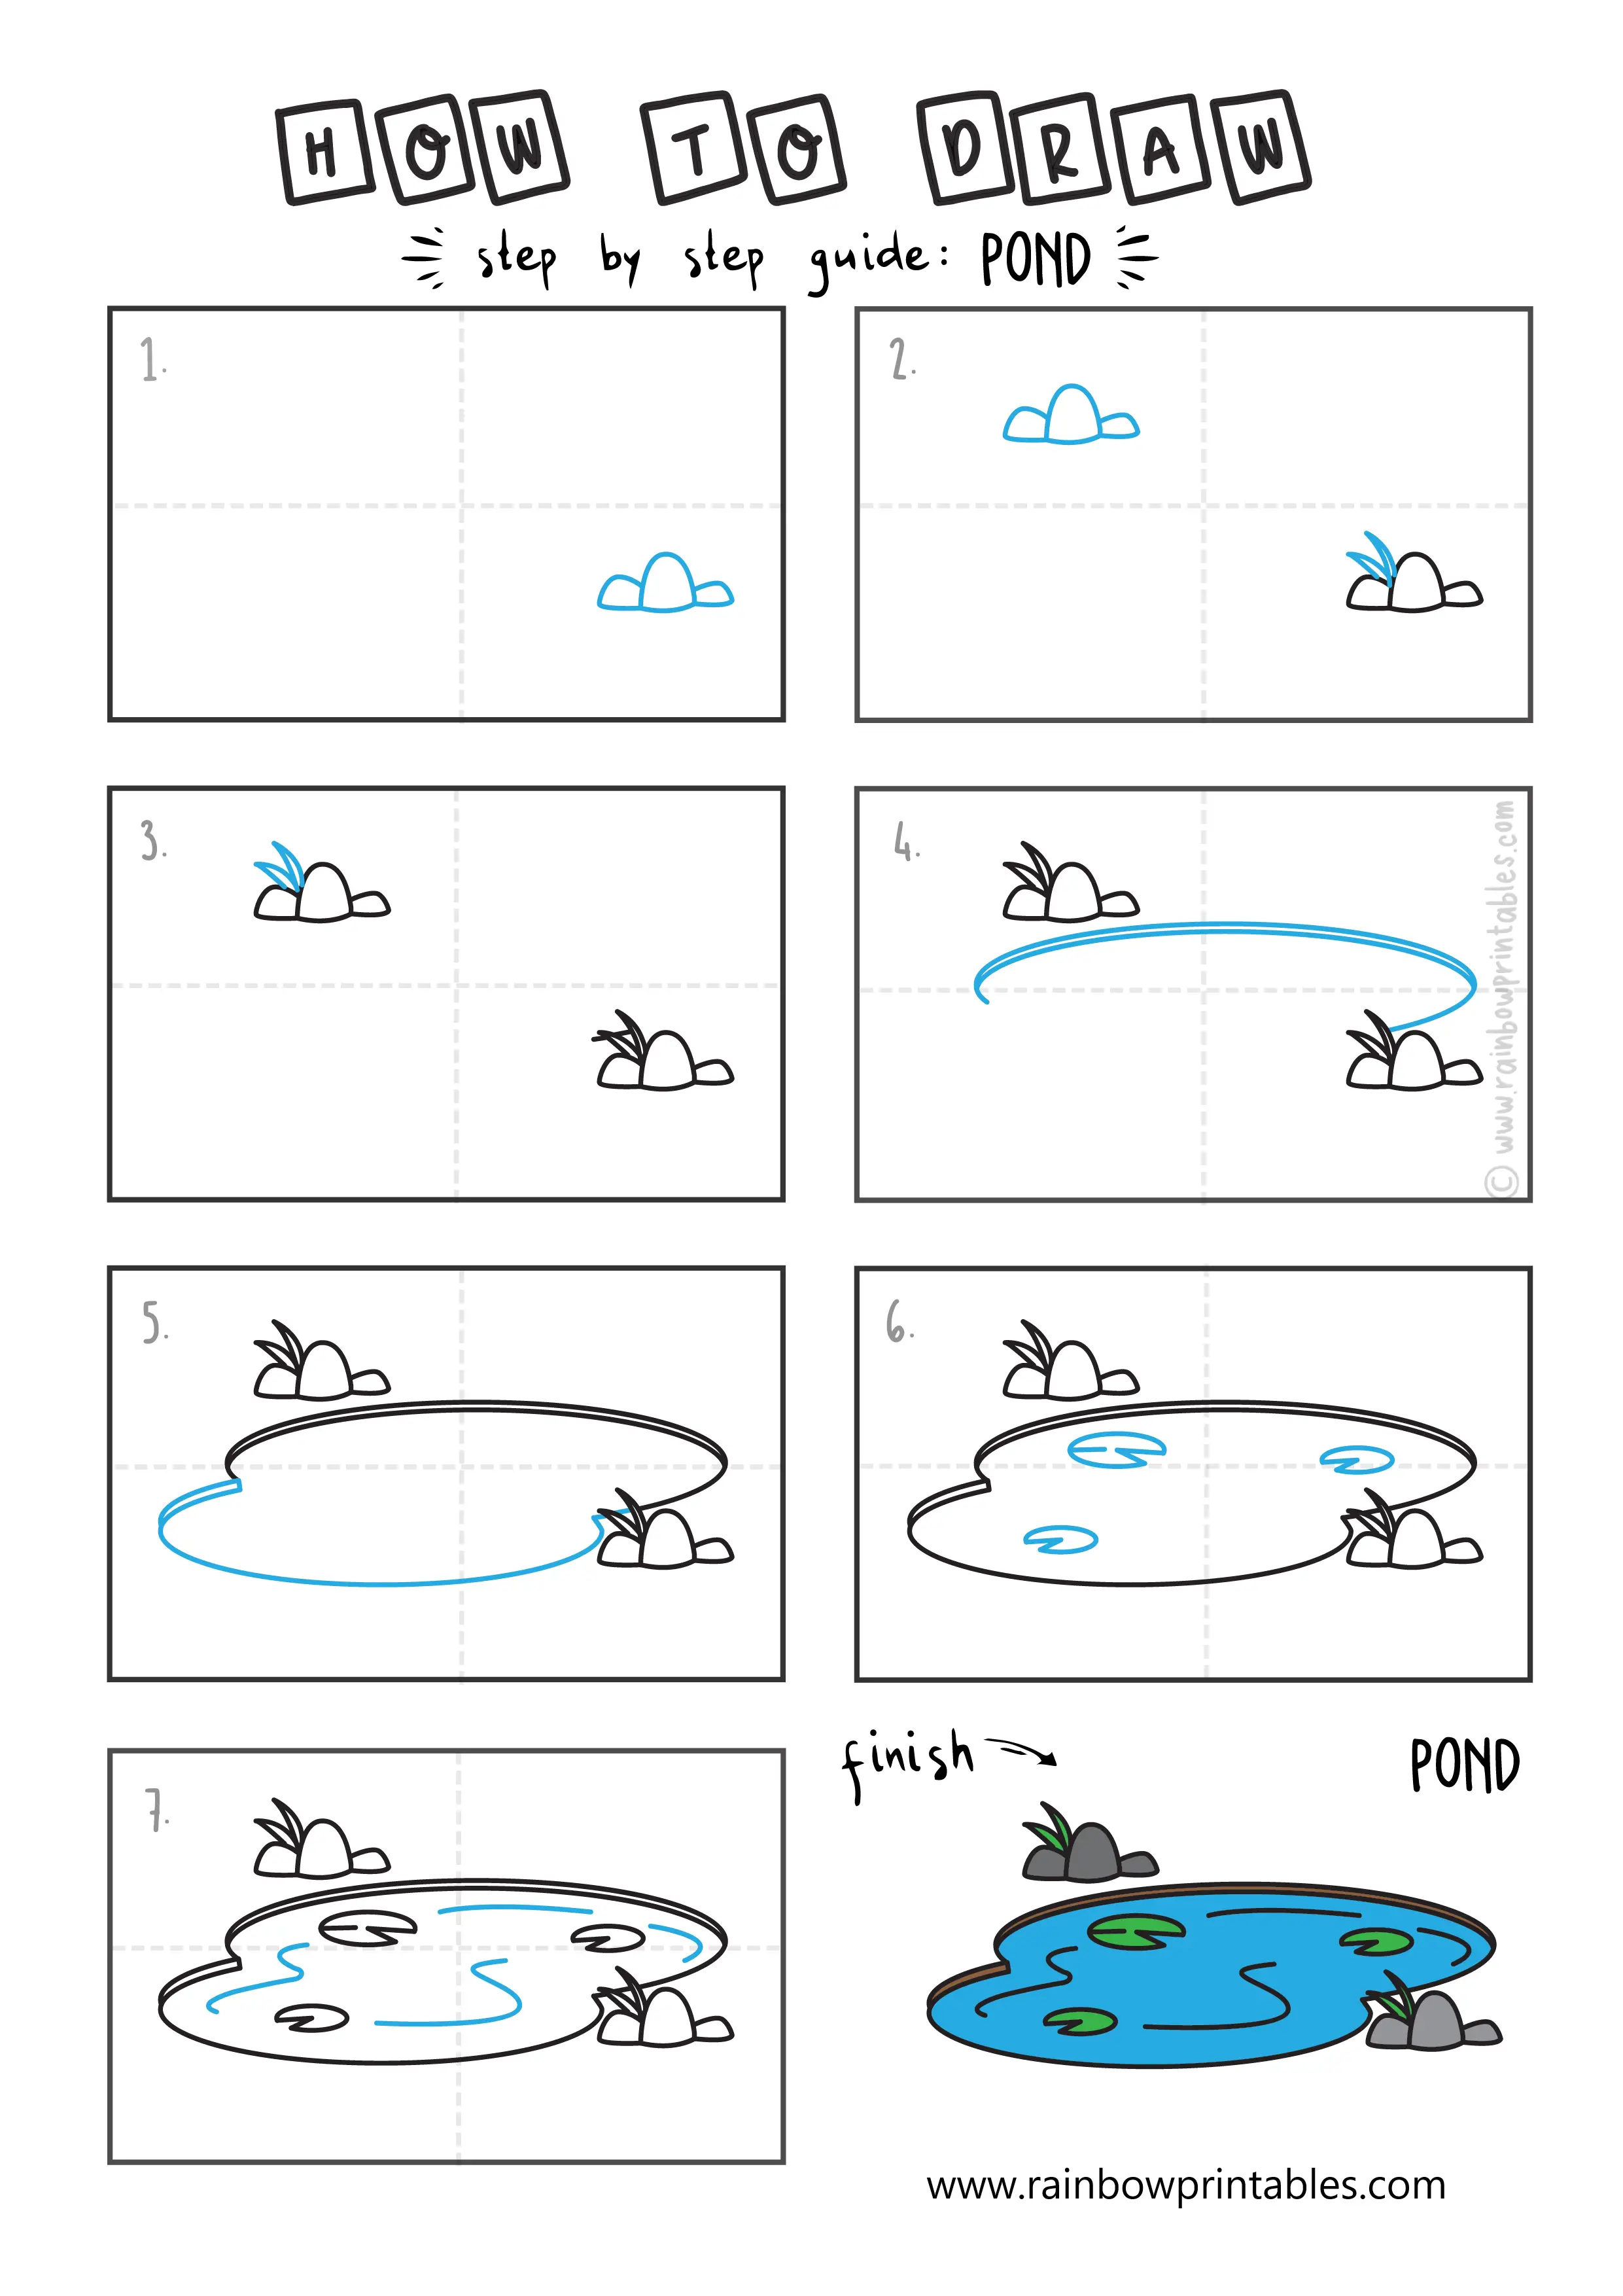 HOW TO DRAW A BLUE POND LAKE WATER SCENE ILLUSTRATION STEP BY STEP EASY SIMPLE FOR KIDS